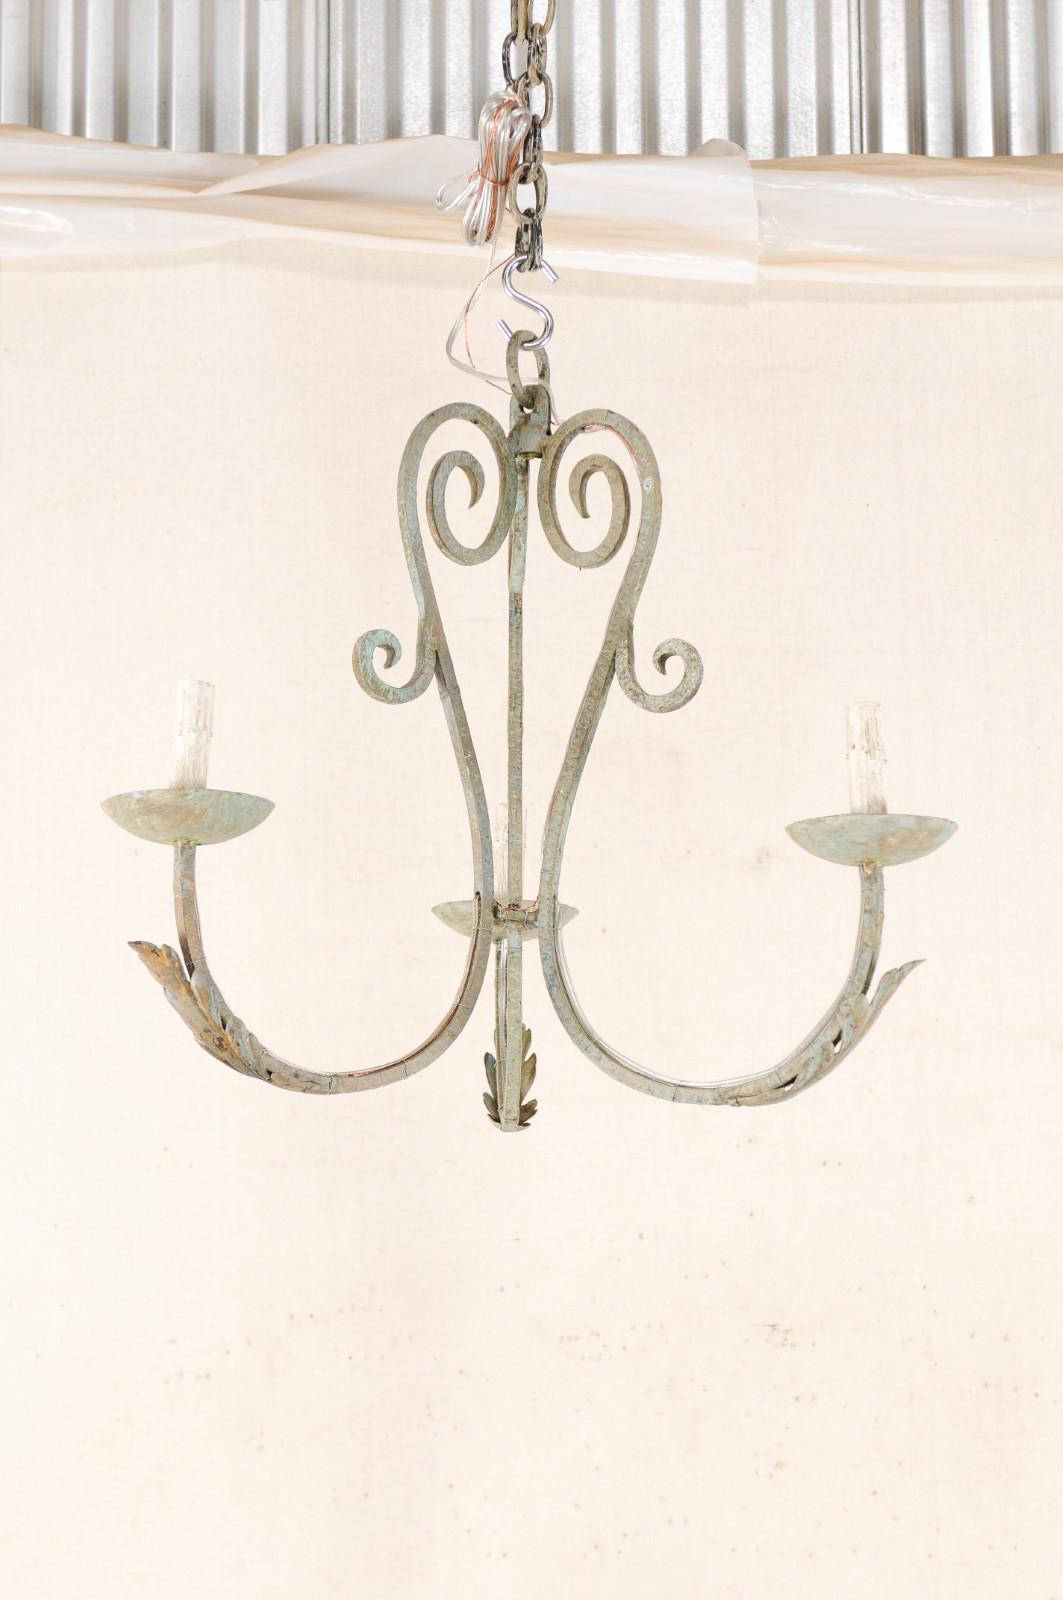 A French three-light painted iron chandelier from the mid-20th century. This vintage hanging light from France is made of three swagging arms that join together at the center creating a visually open column, adorn with various scrolls. Each of the